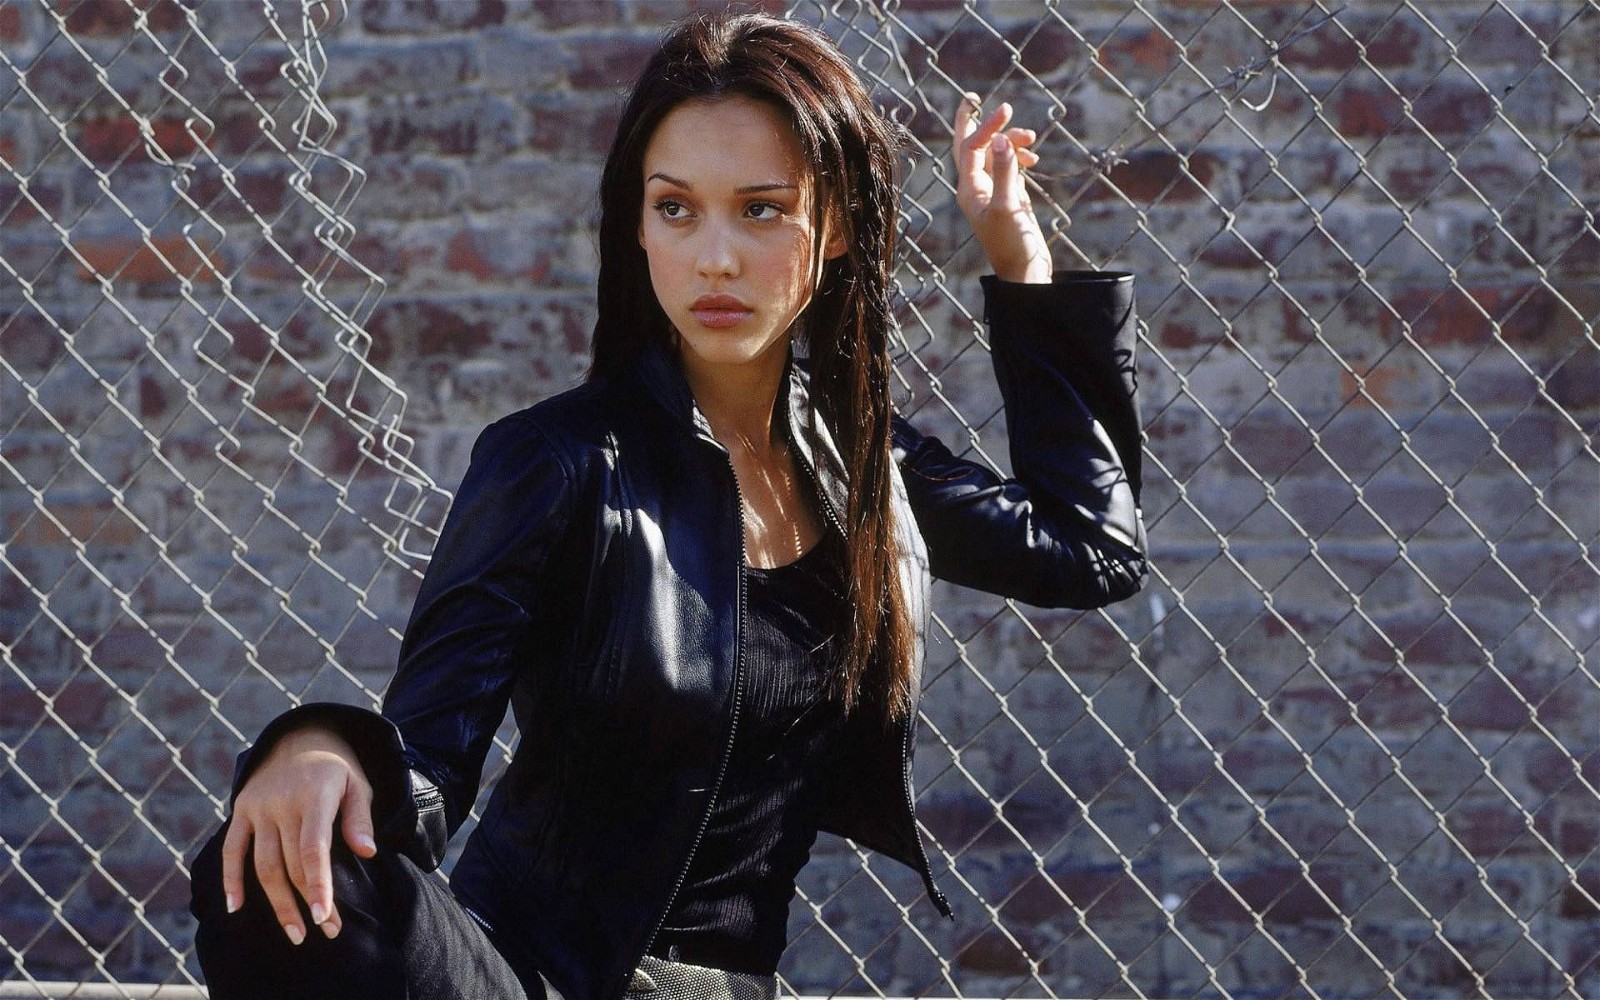 Dark Angel star Jessica Alba was once kidnapped from the set of her show in 1996